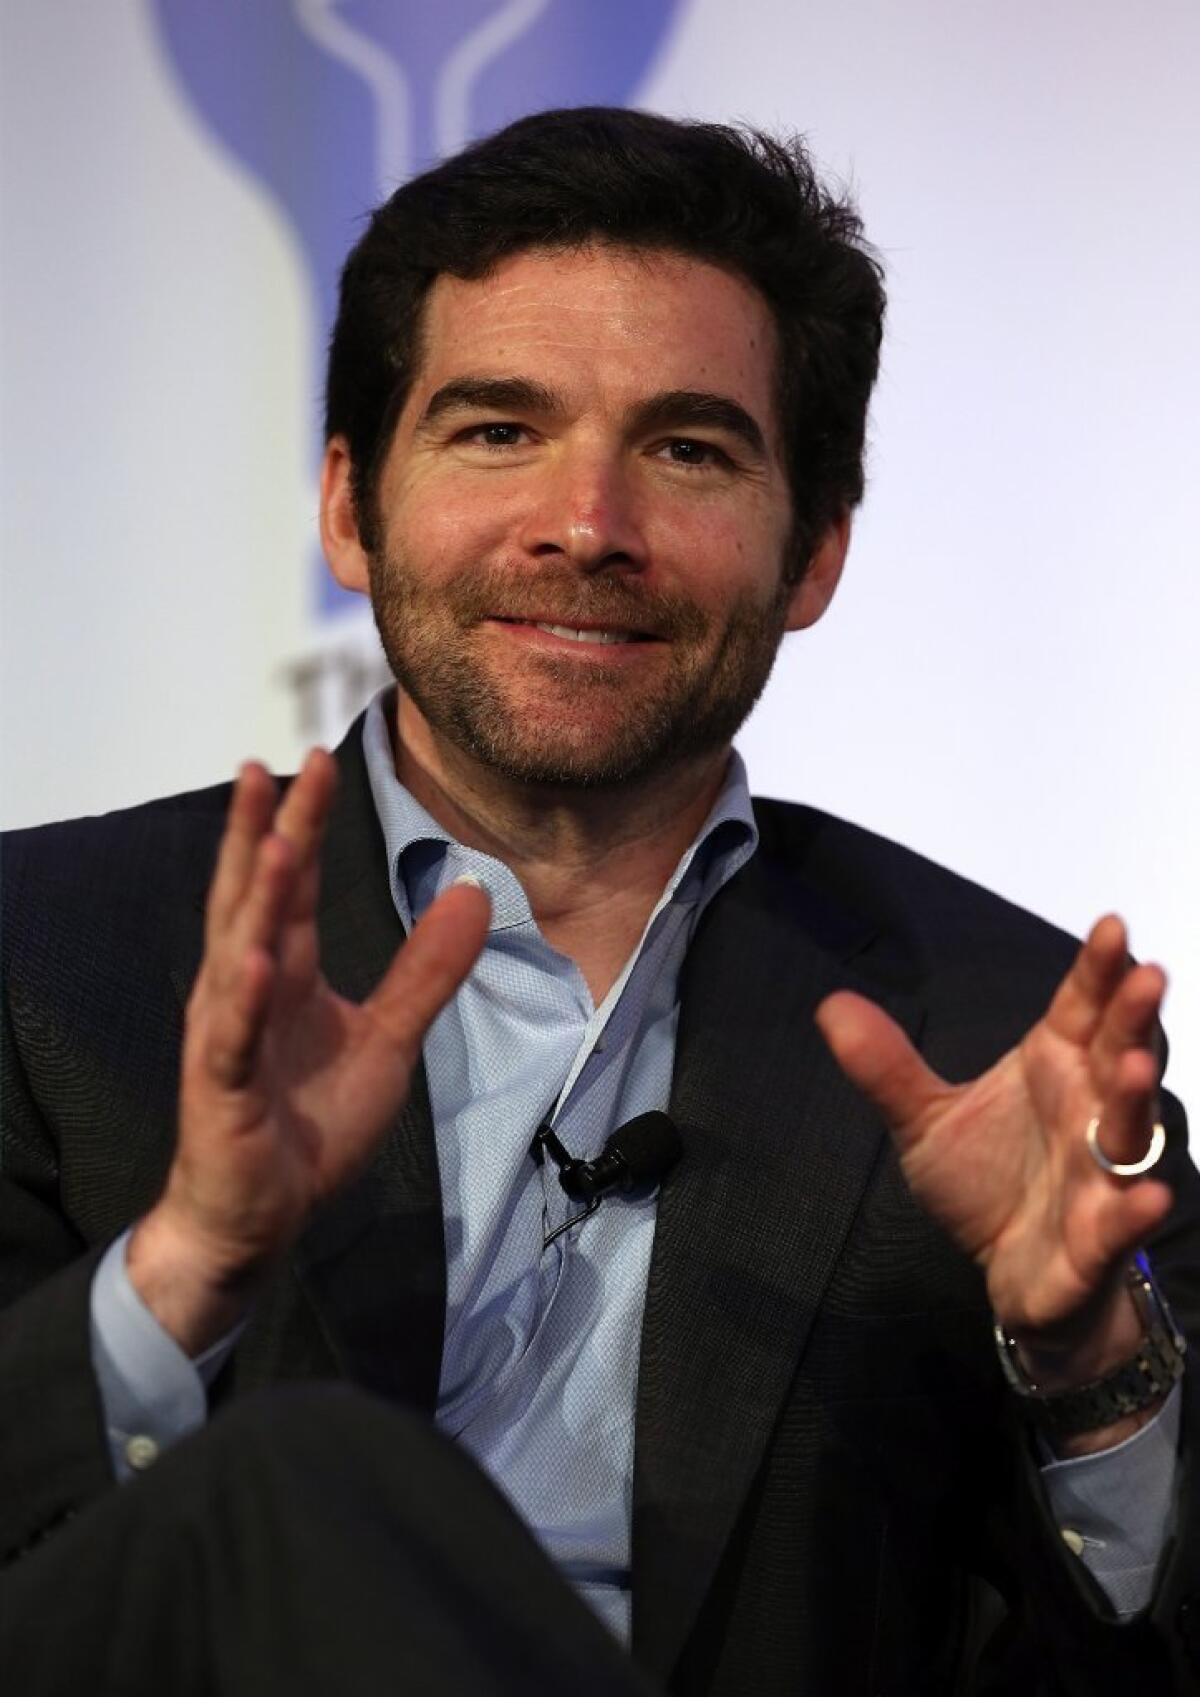 LinkedIn CEO Jeff Weiner says his professional networking company is looking to expand in China.